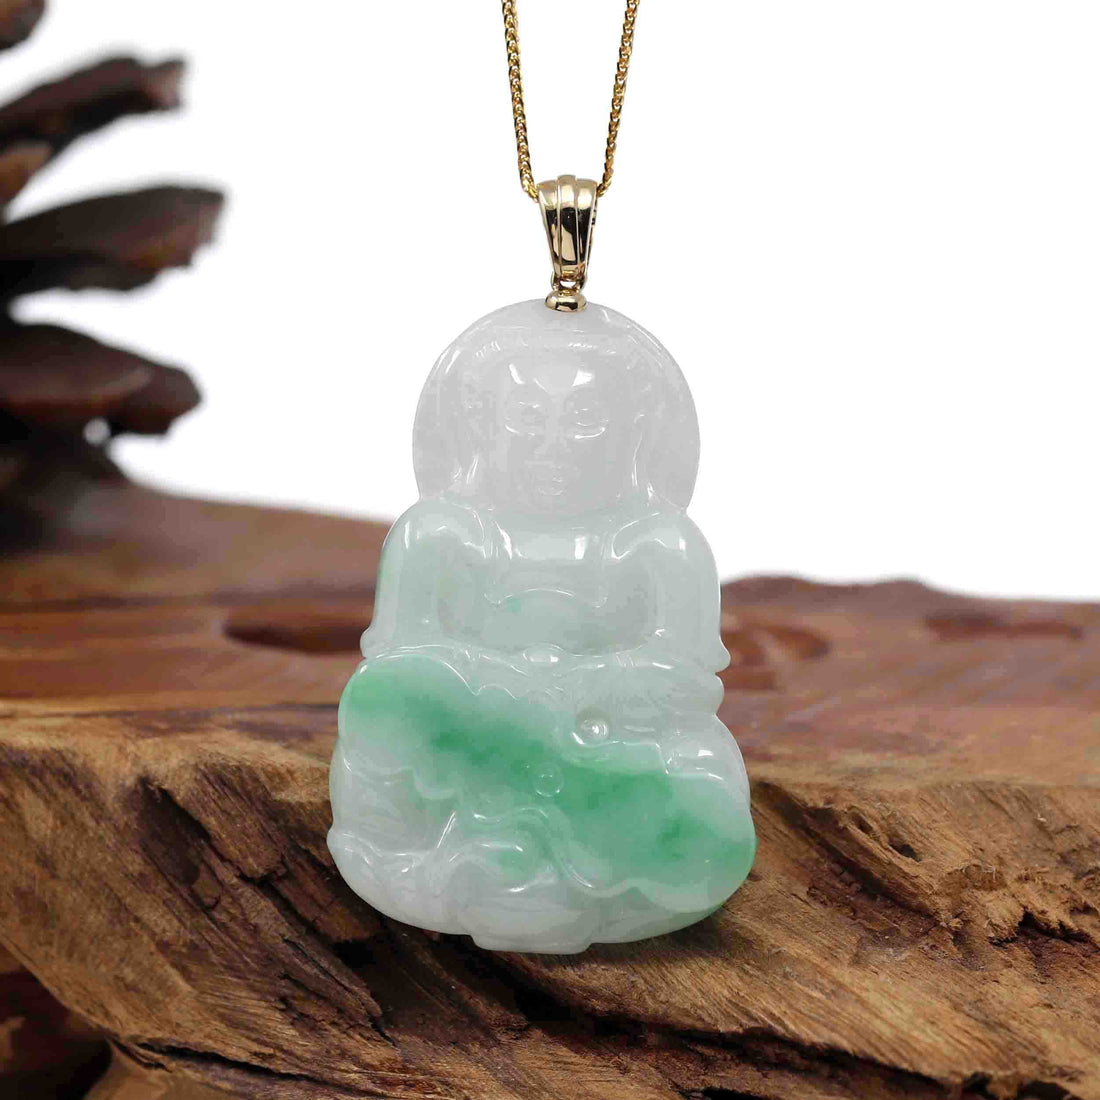 Baikalla Jewelry Jade Guanyin Pendant Necklace Pendant Only Goddess of Compassion" 14k Yellow Gold Genuine Burmese Jadeite Jade Guanyin Necklace With Good Luck Design